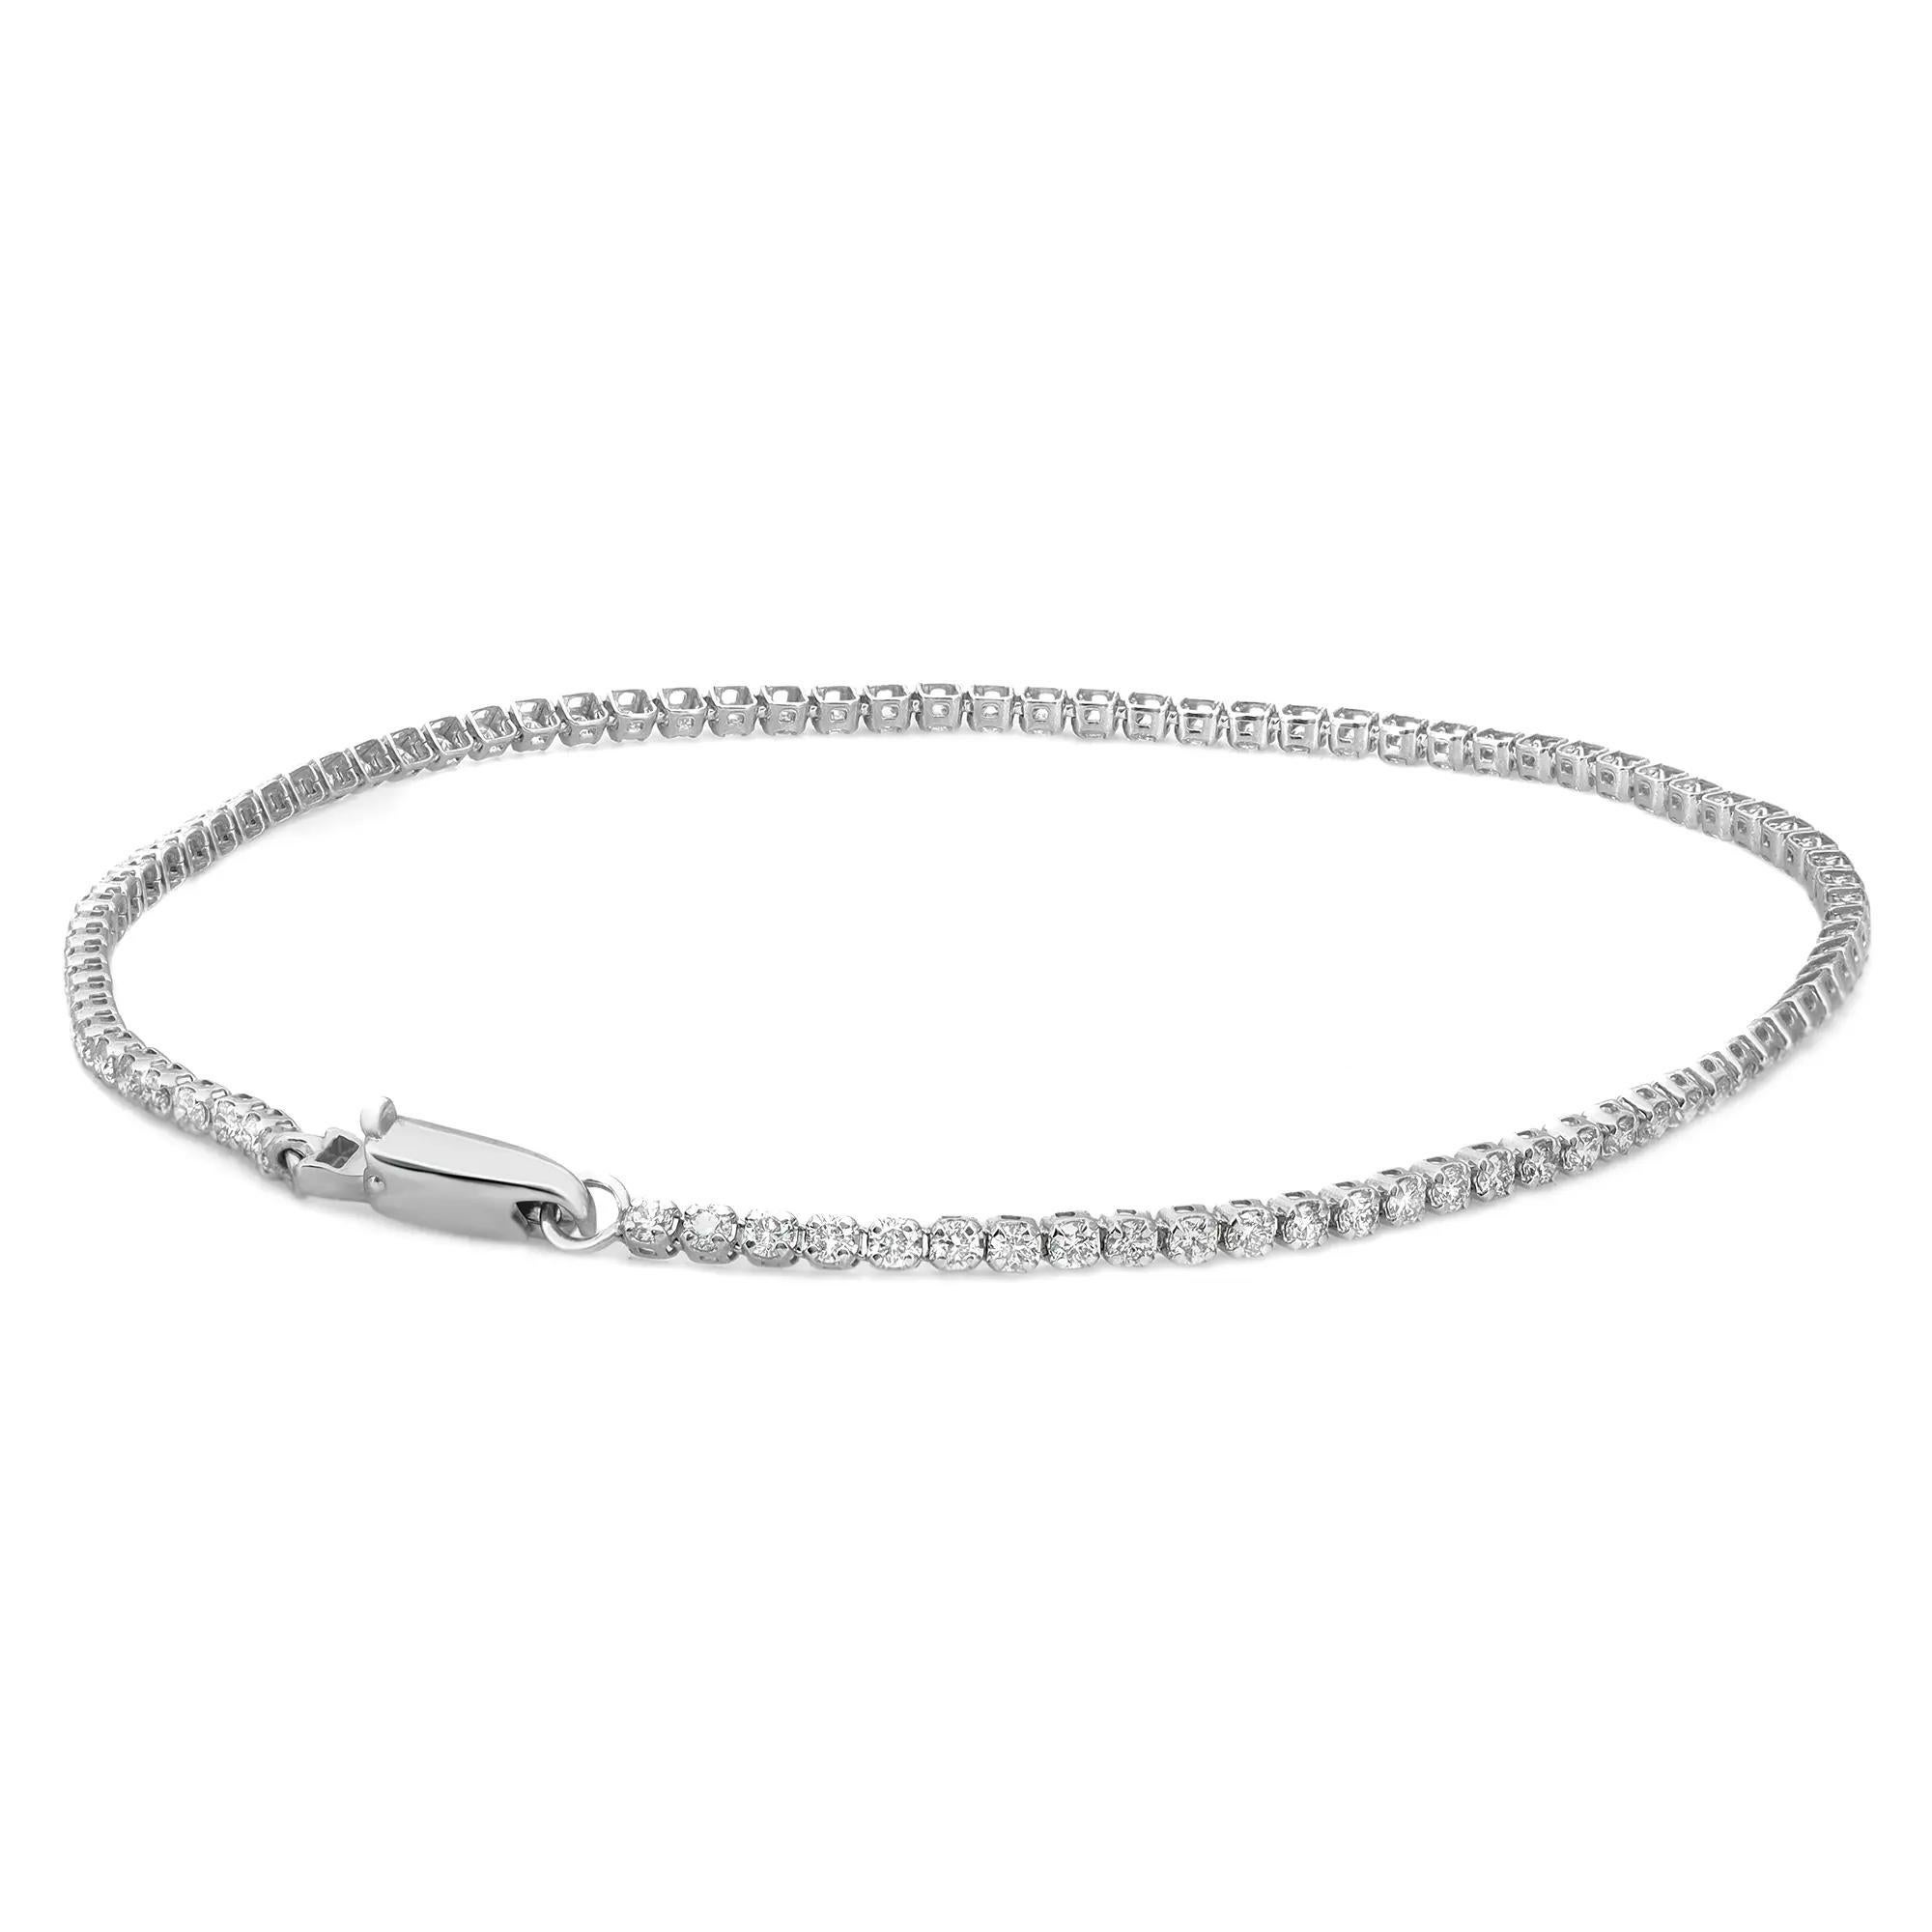 Prong Set Round Cut Diamond Tennis Bracelet 14K White Gold 1.02Ctw 7 Inches In New Condition For Sale In New York, NY